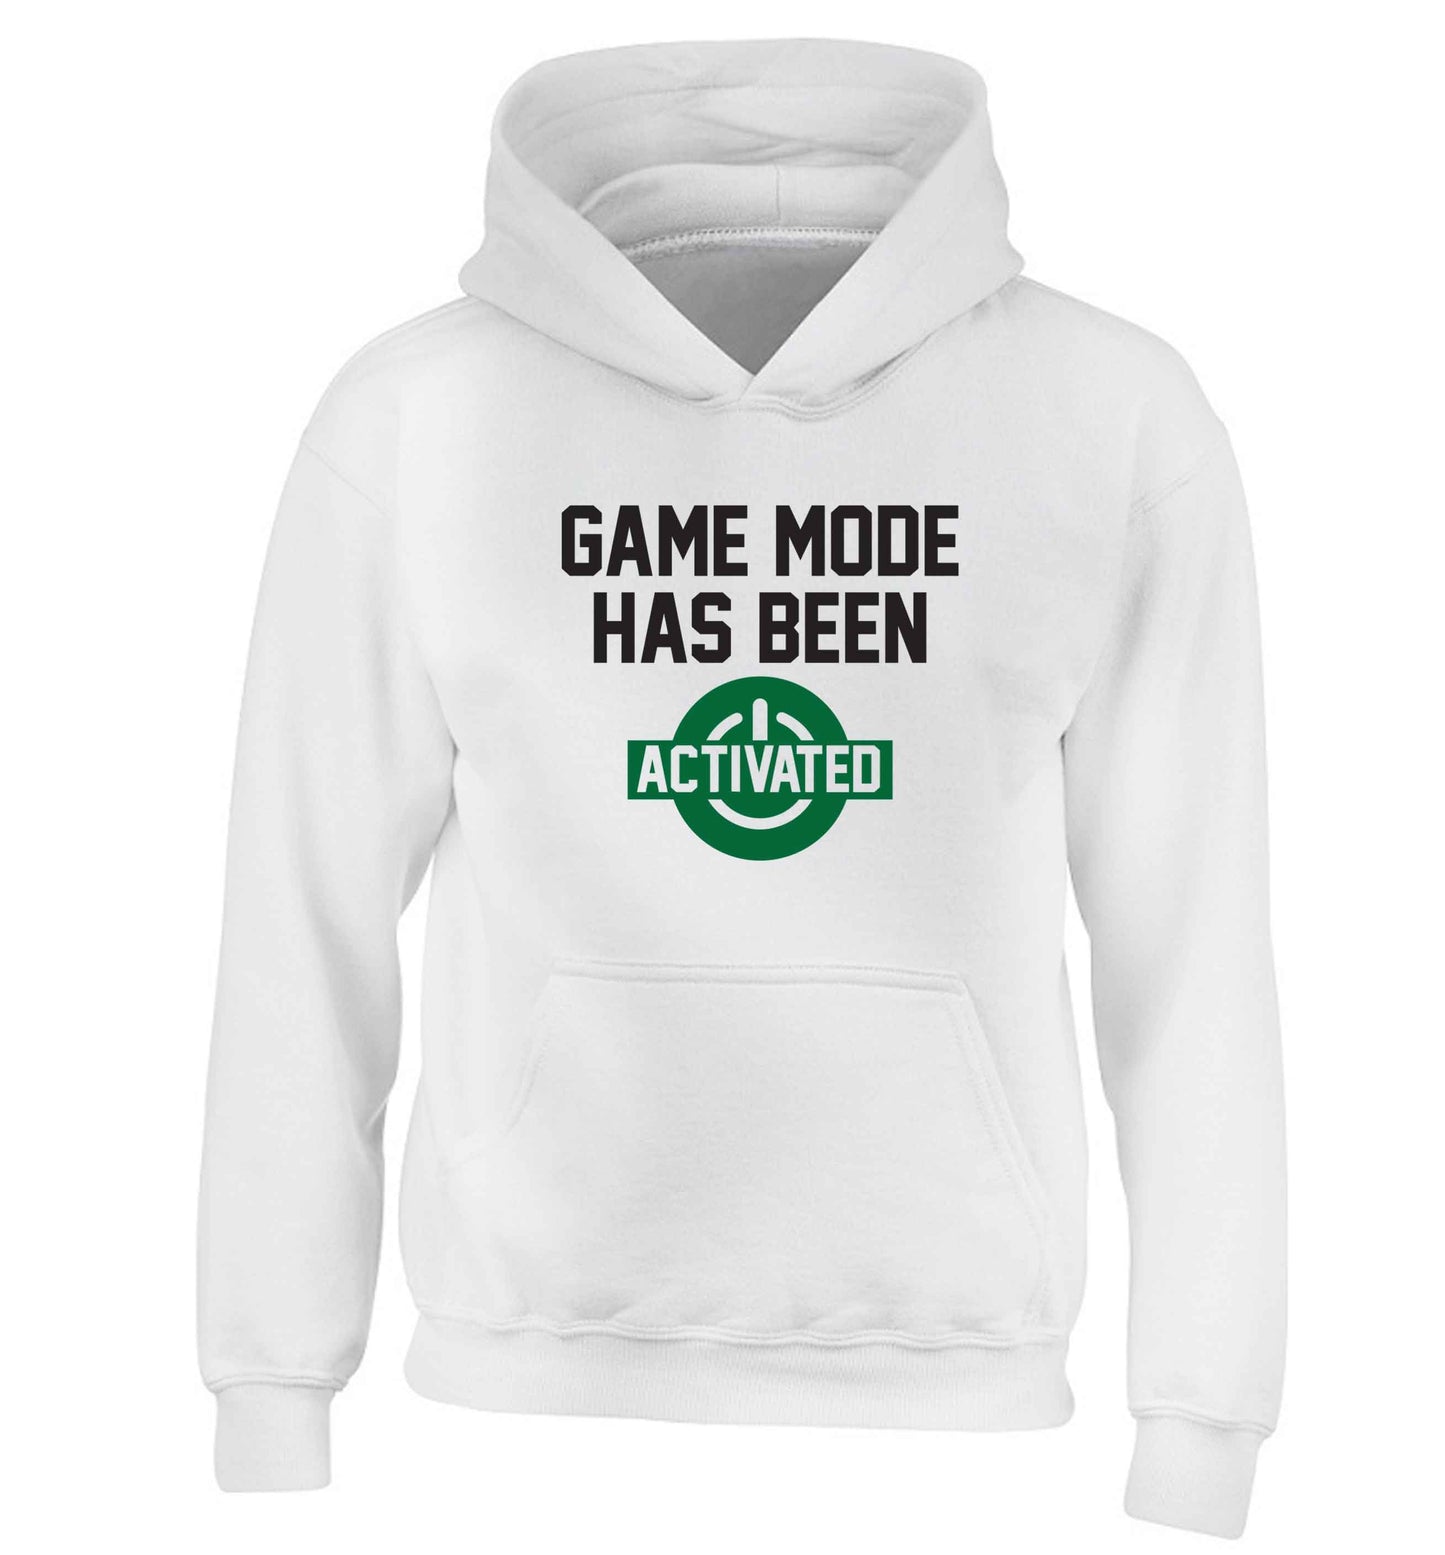 Game mode has been activated children's white hoodie 12-13 Years